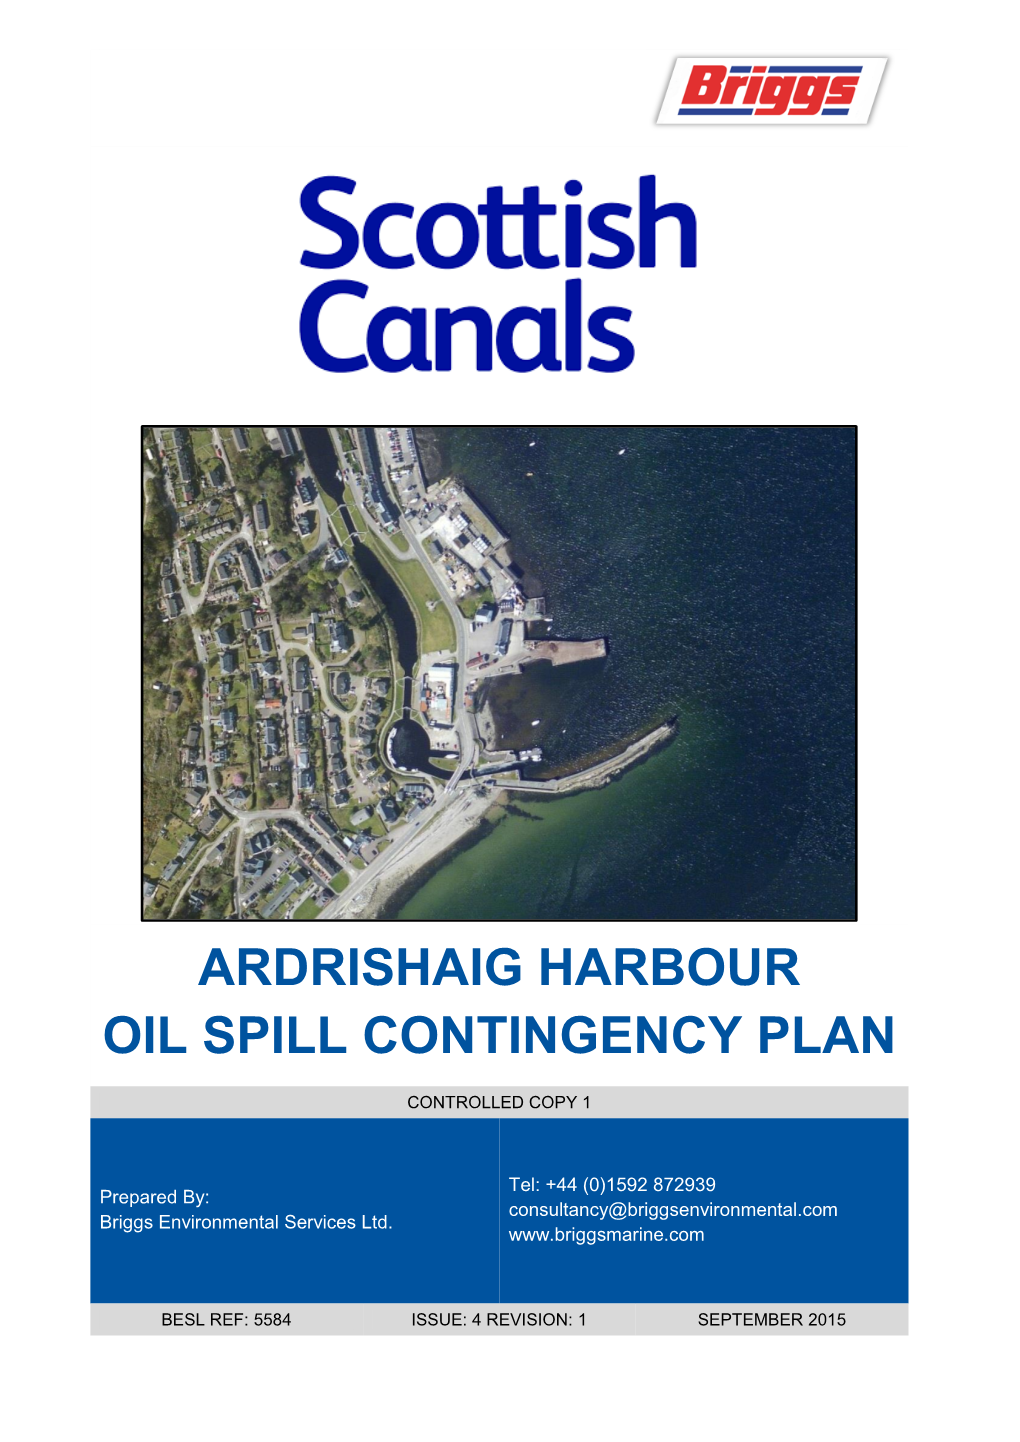 Ardrishaig Harbour Oil Spill Contingency Plan Is a Controlled Document